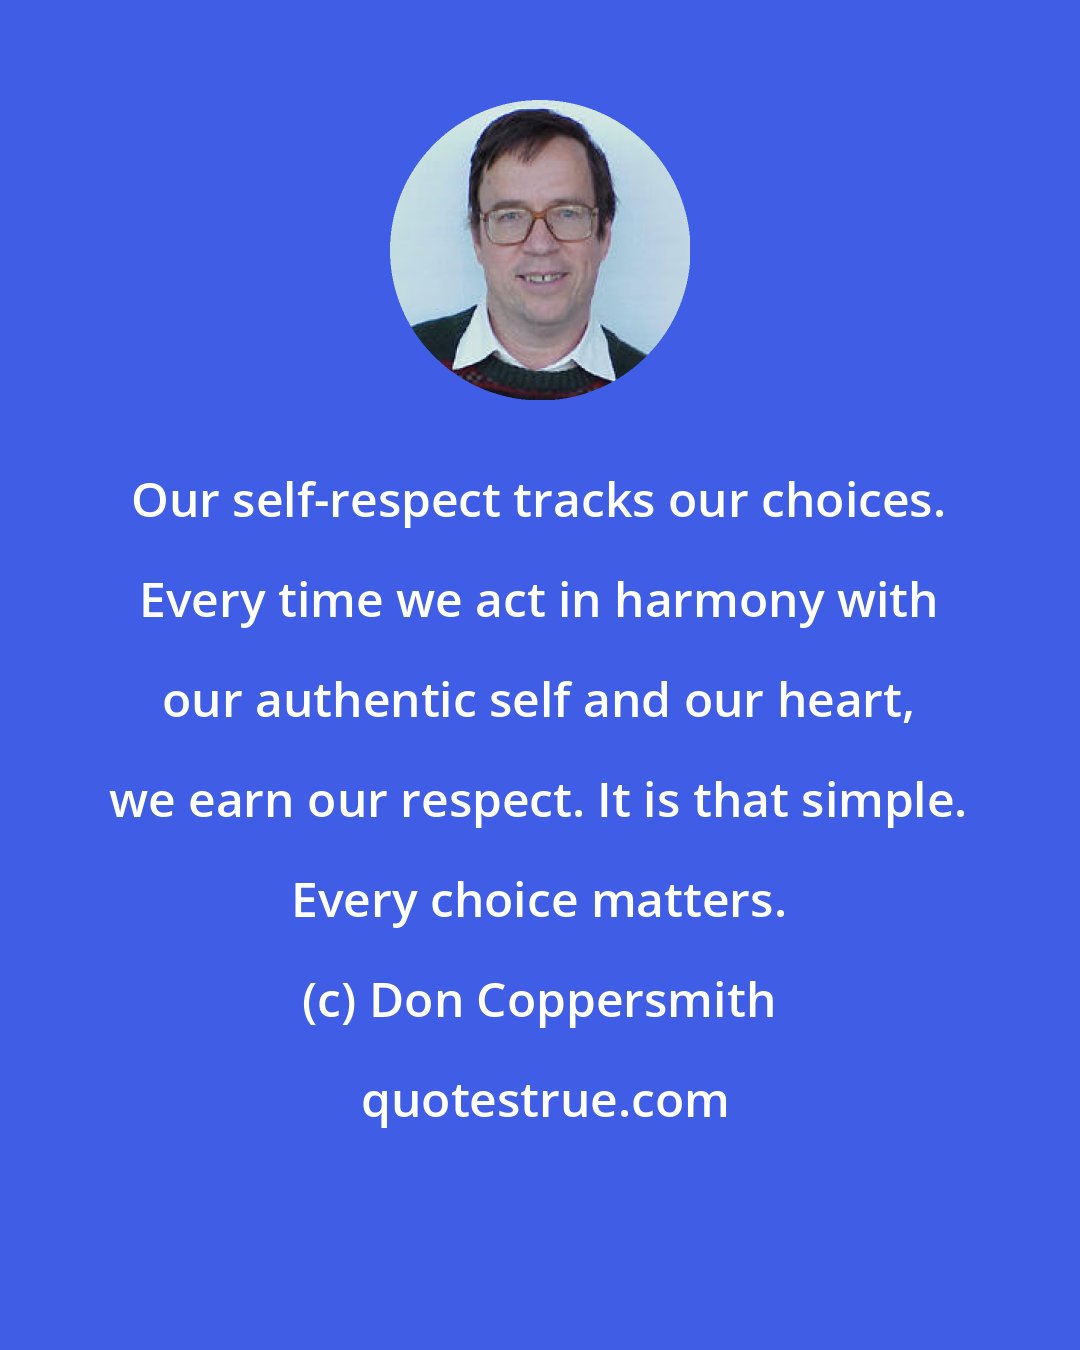 Don Coppersmith: Our self-respect tracks our choices. Every time we act in harmony with our authentic self and our heart, we earn our respect. It is that simple. Every choice matters.